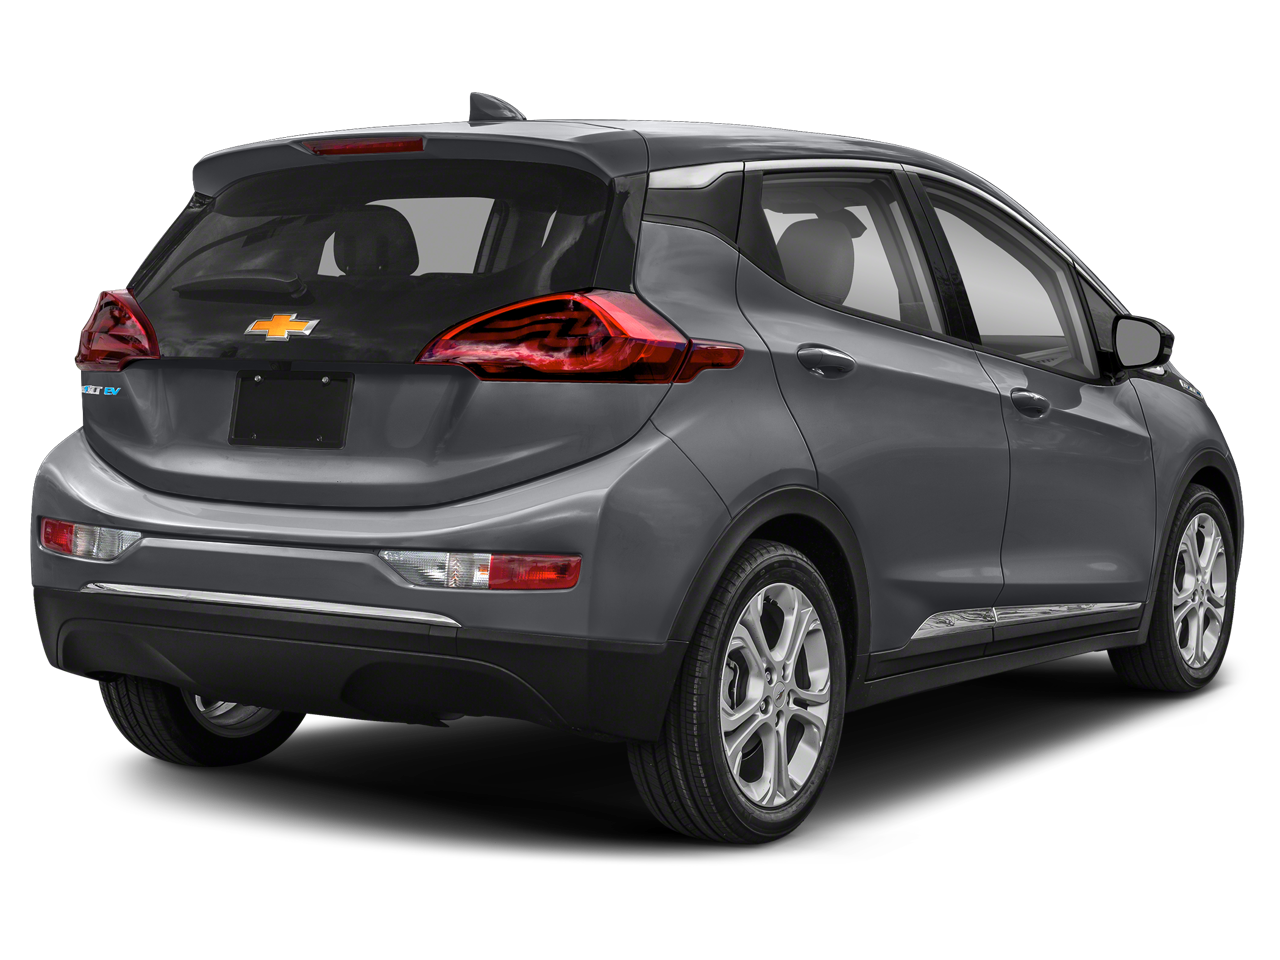 Used 2020 Chevrolet Bolt EV LT with VIN 1G1FY6S08L4146543 for sale in Fishers, IN